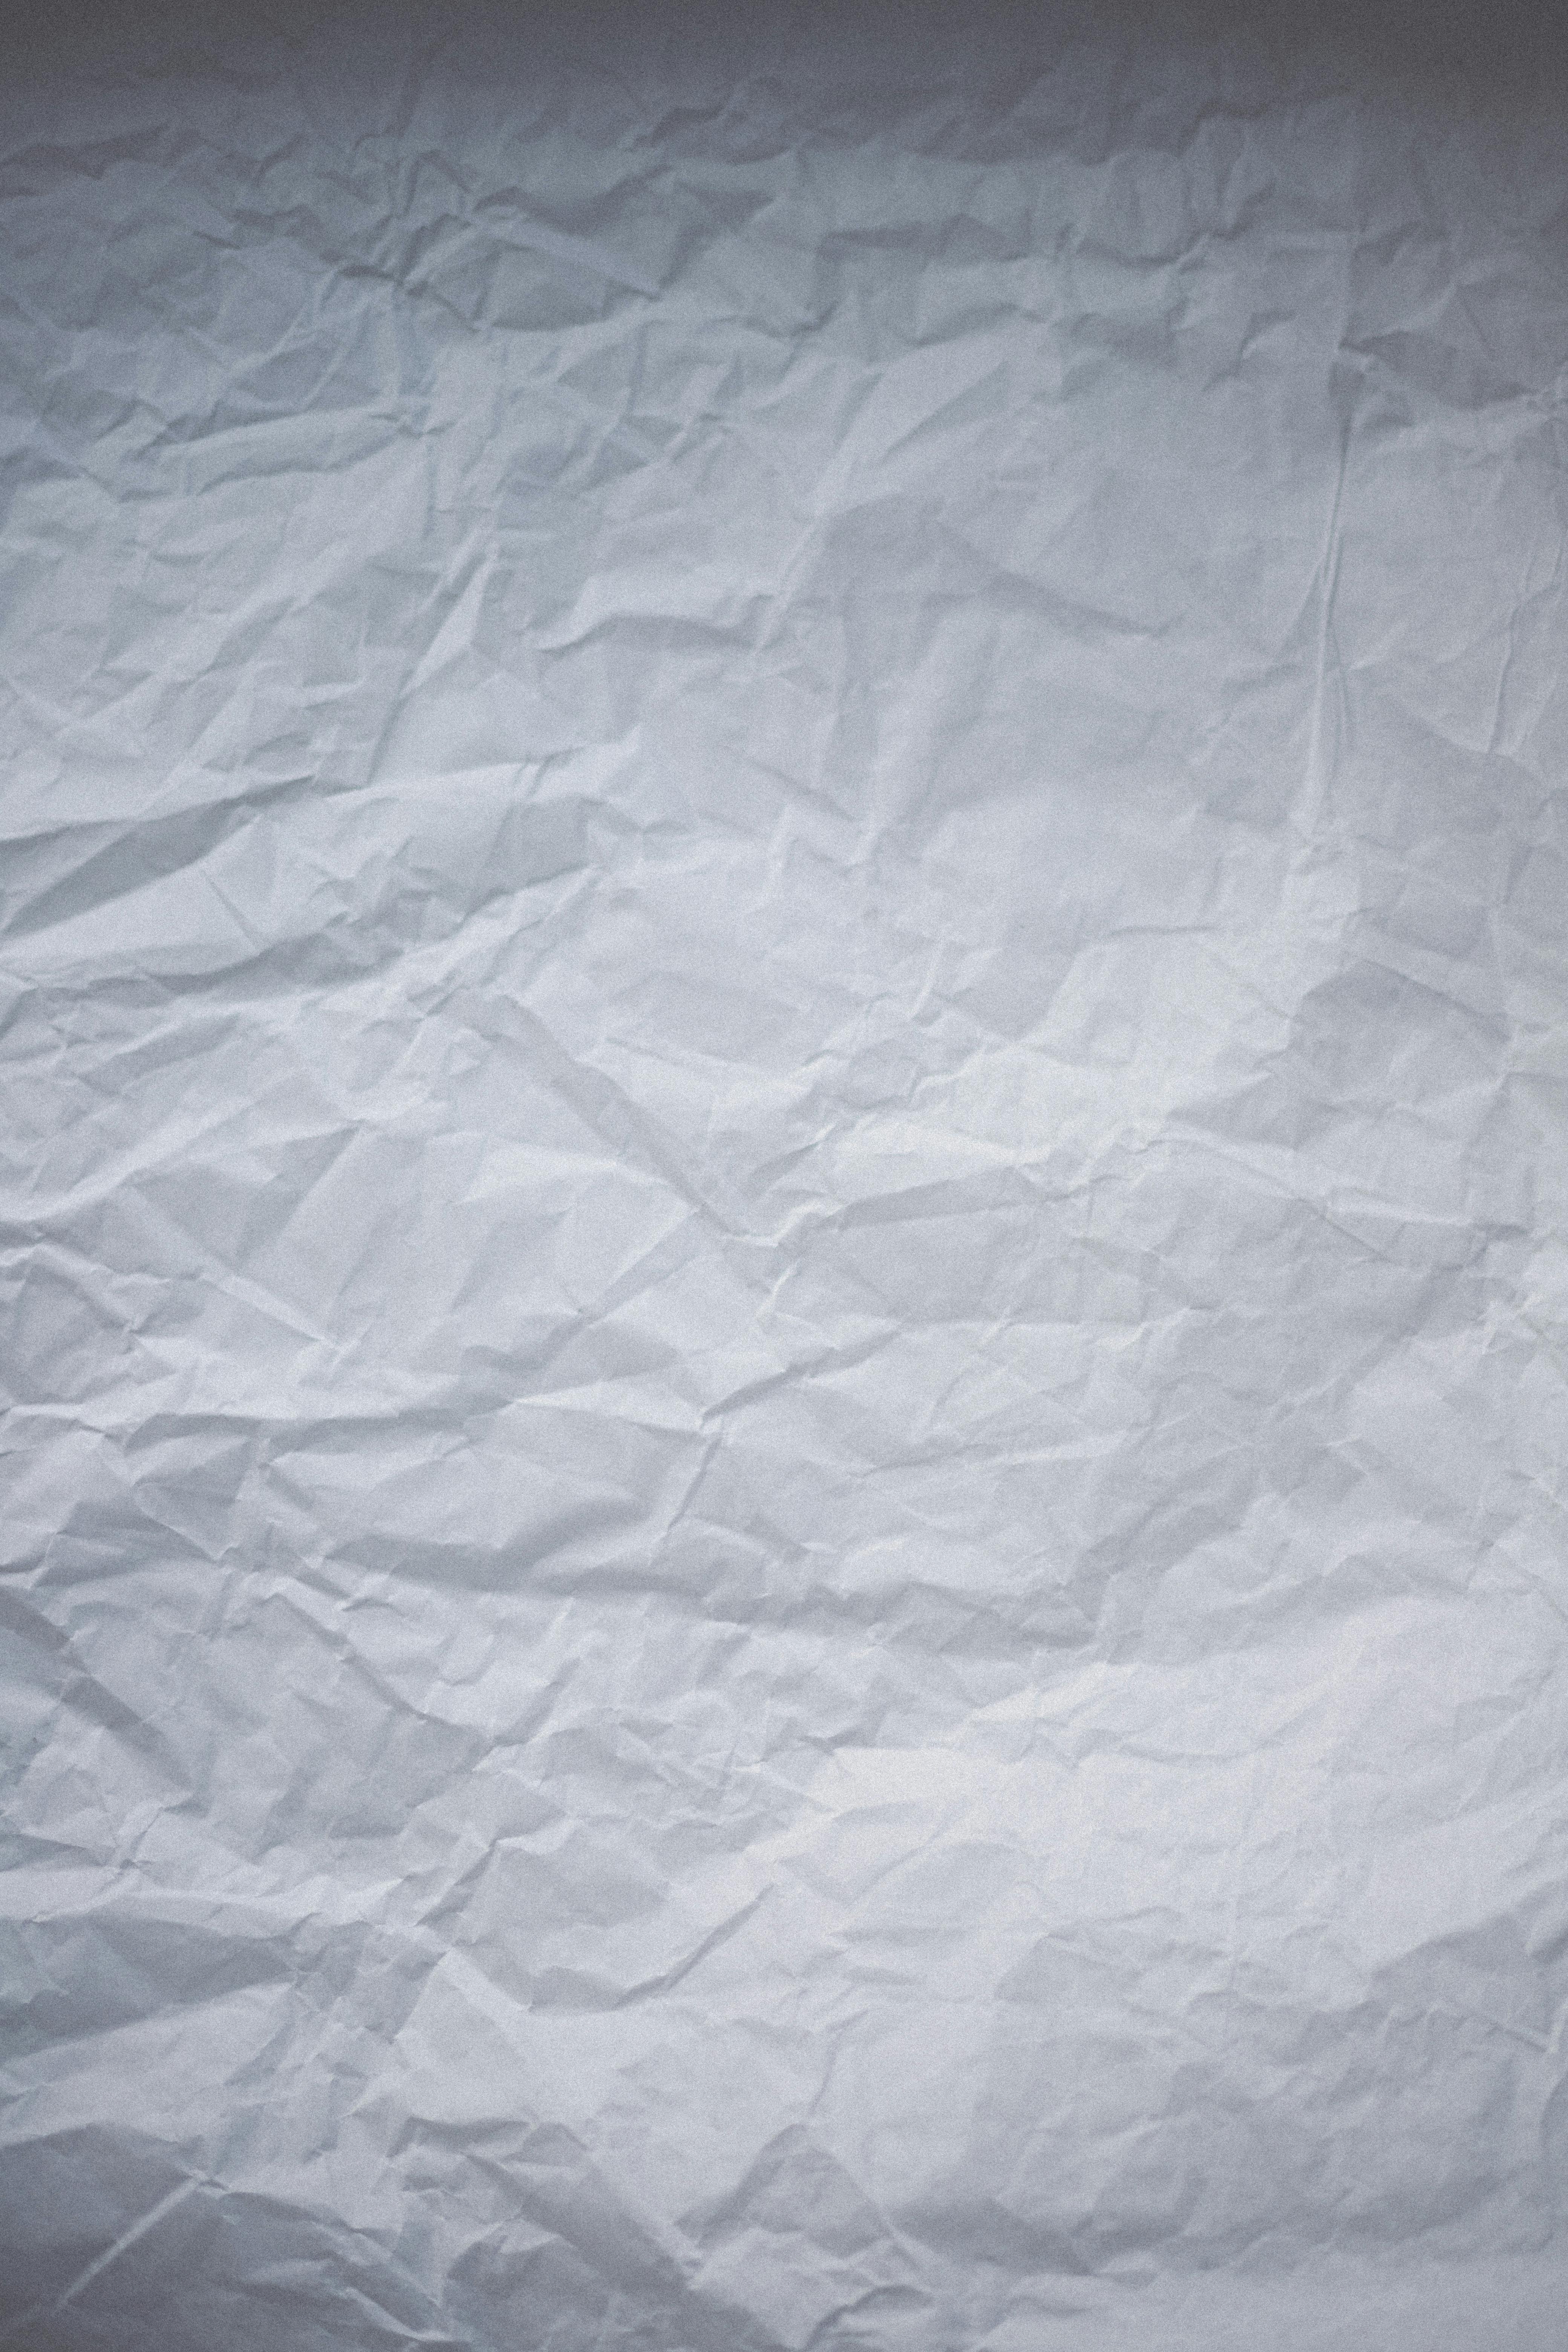 Paper Texture Photos, Download The BEST Free Paper Texture Stock Photos &  HD Images